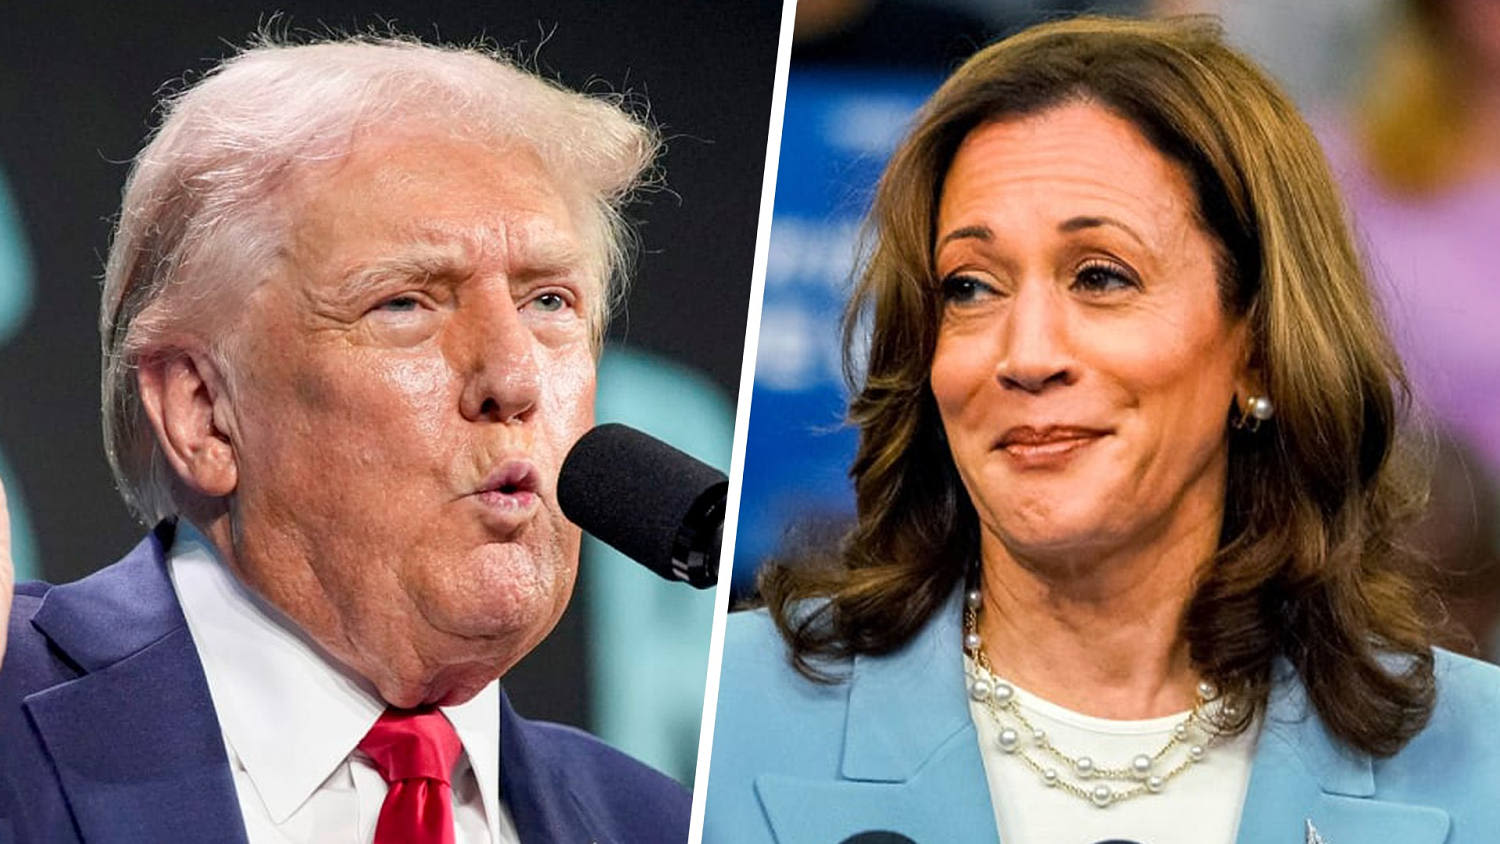 Trump 'blowing it' by continuing to bash Harris and calling her a 'horror show'